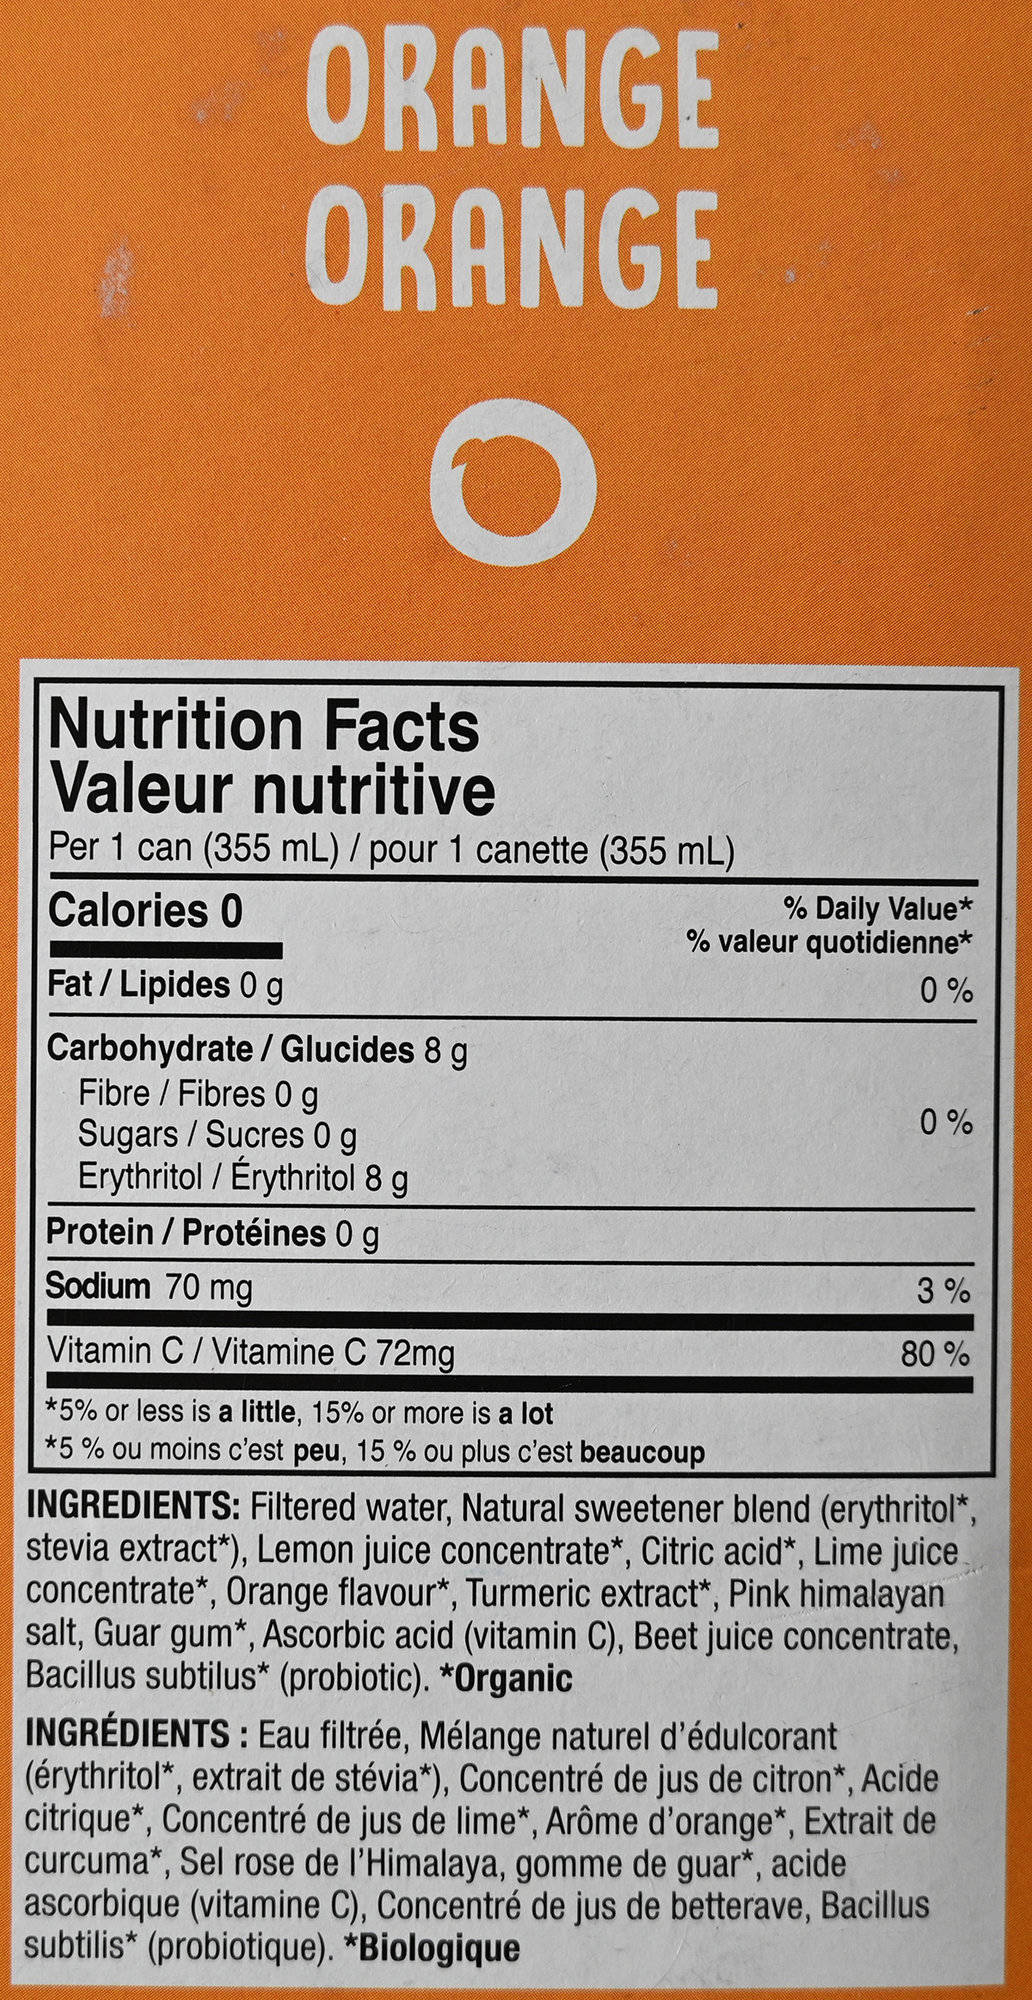 Image of the orange Cove soda nutrition facts from the back of the box.